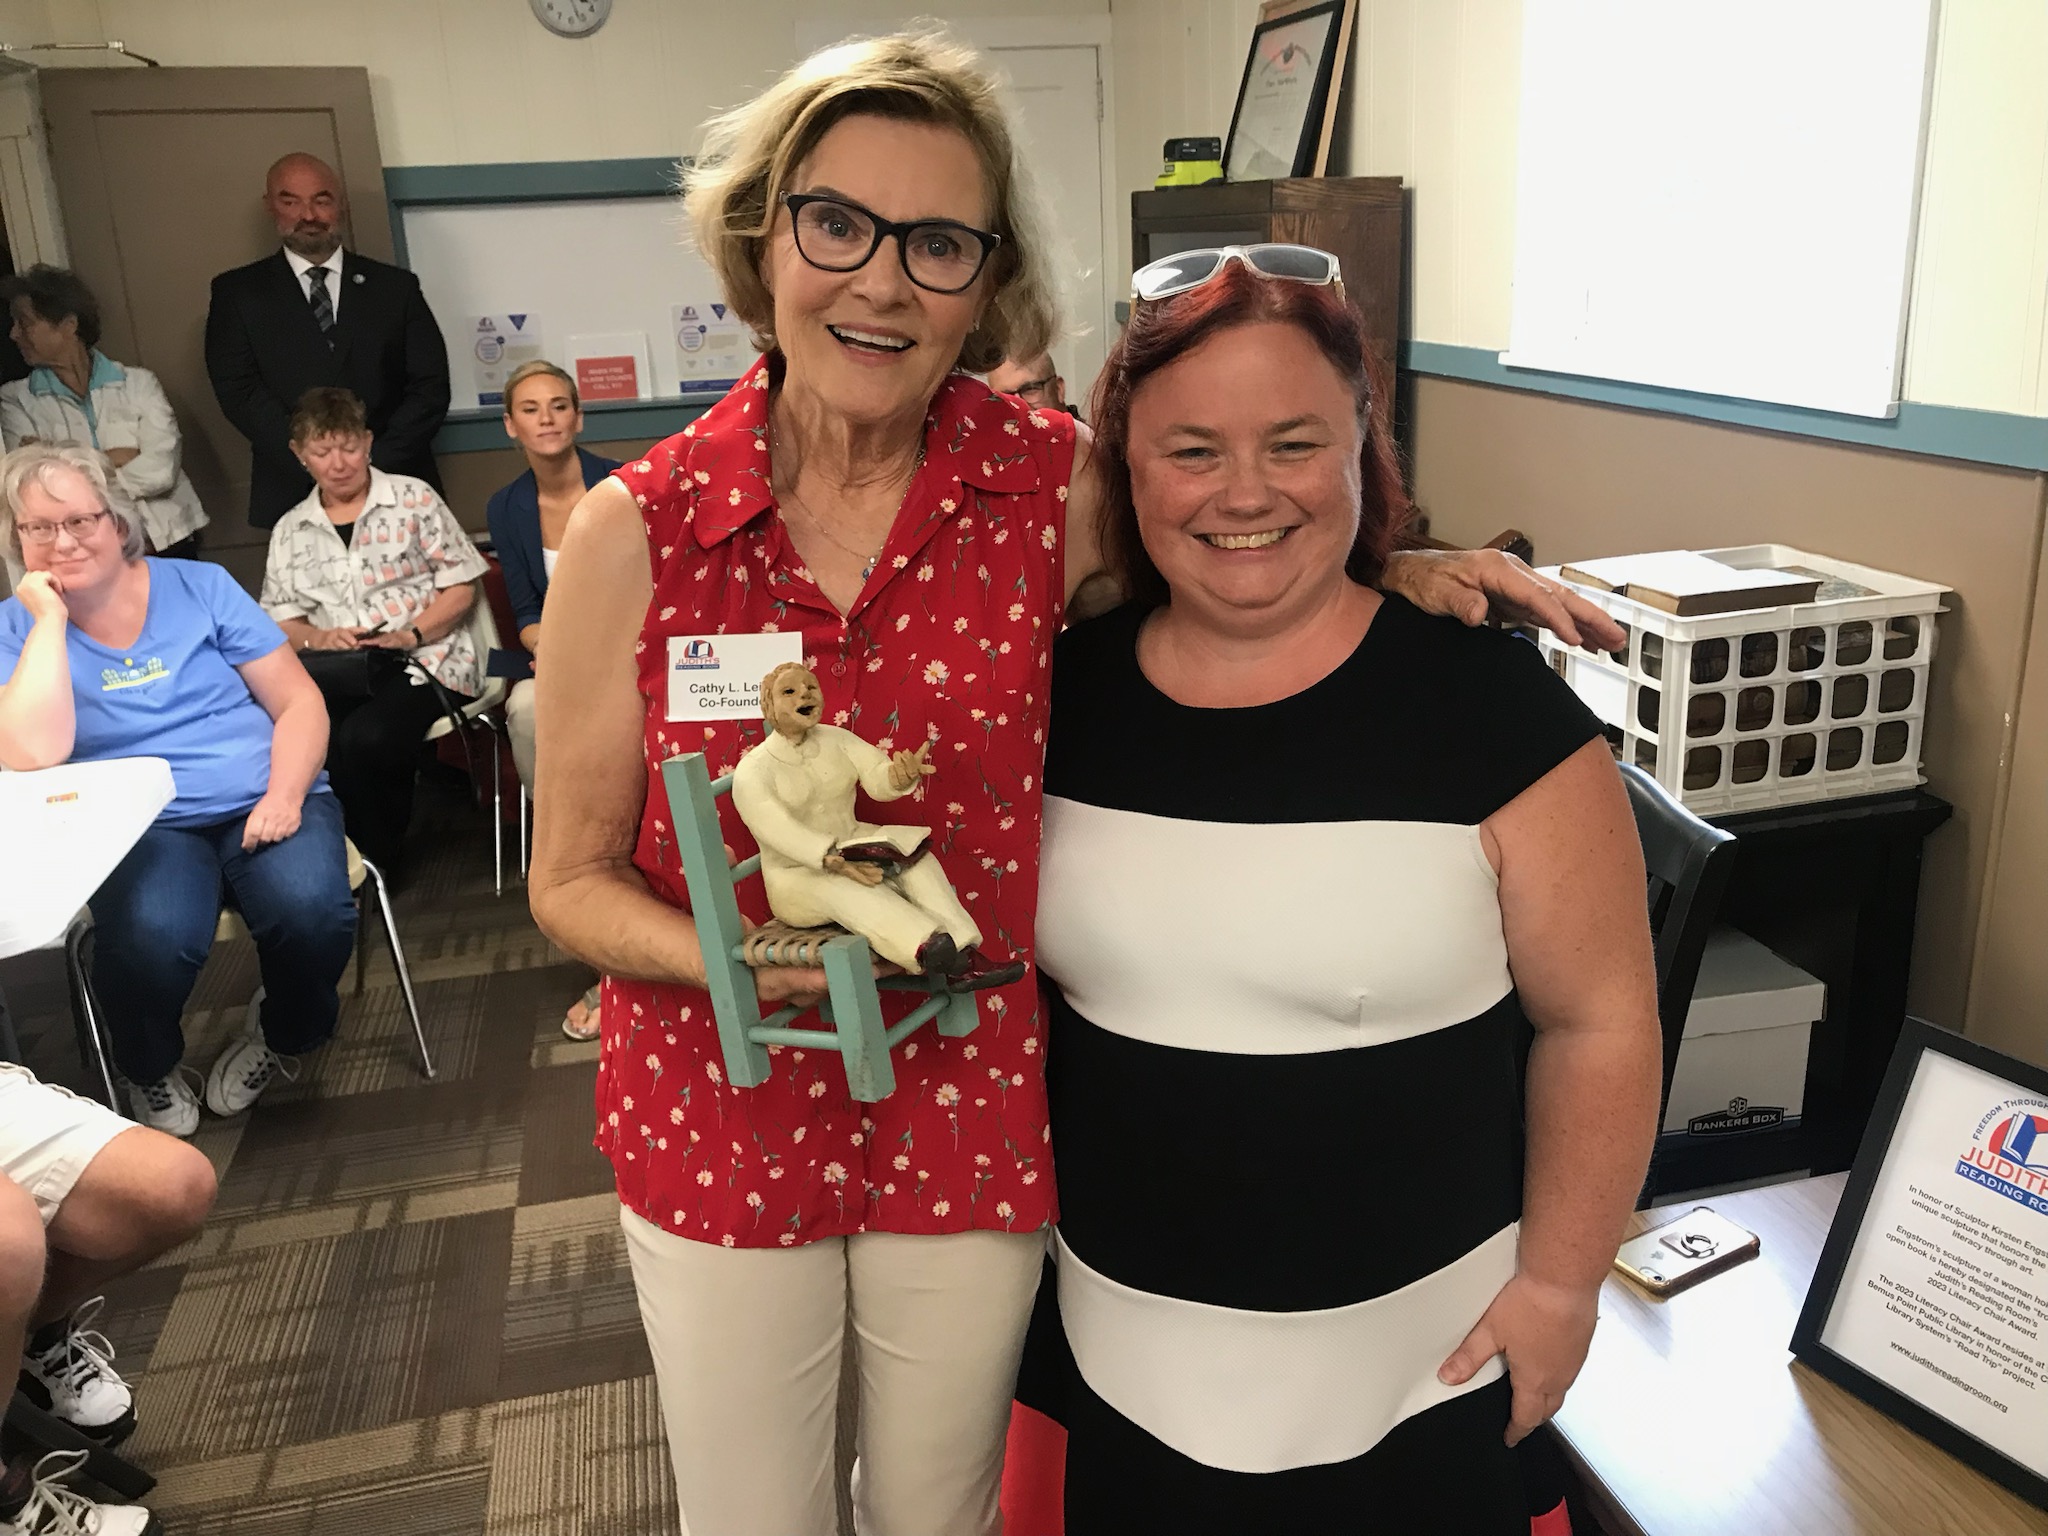 LJ Martin, Outreach & Youth Services, CCLS Library System created “Road Trip” program. She is presented with a Kirsten Engstrom sculpture.